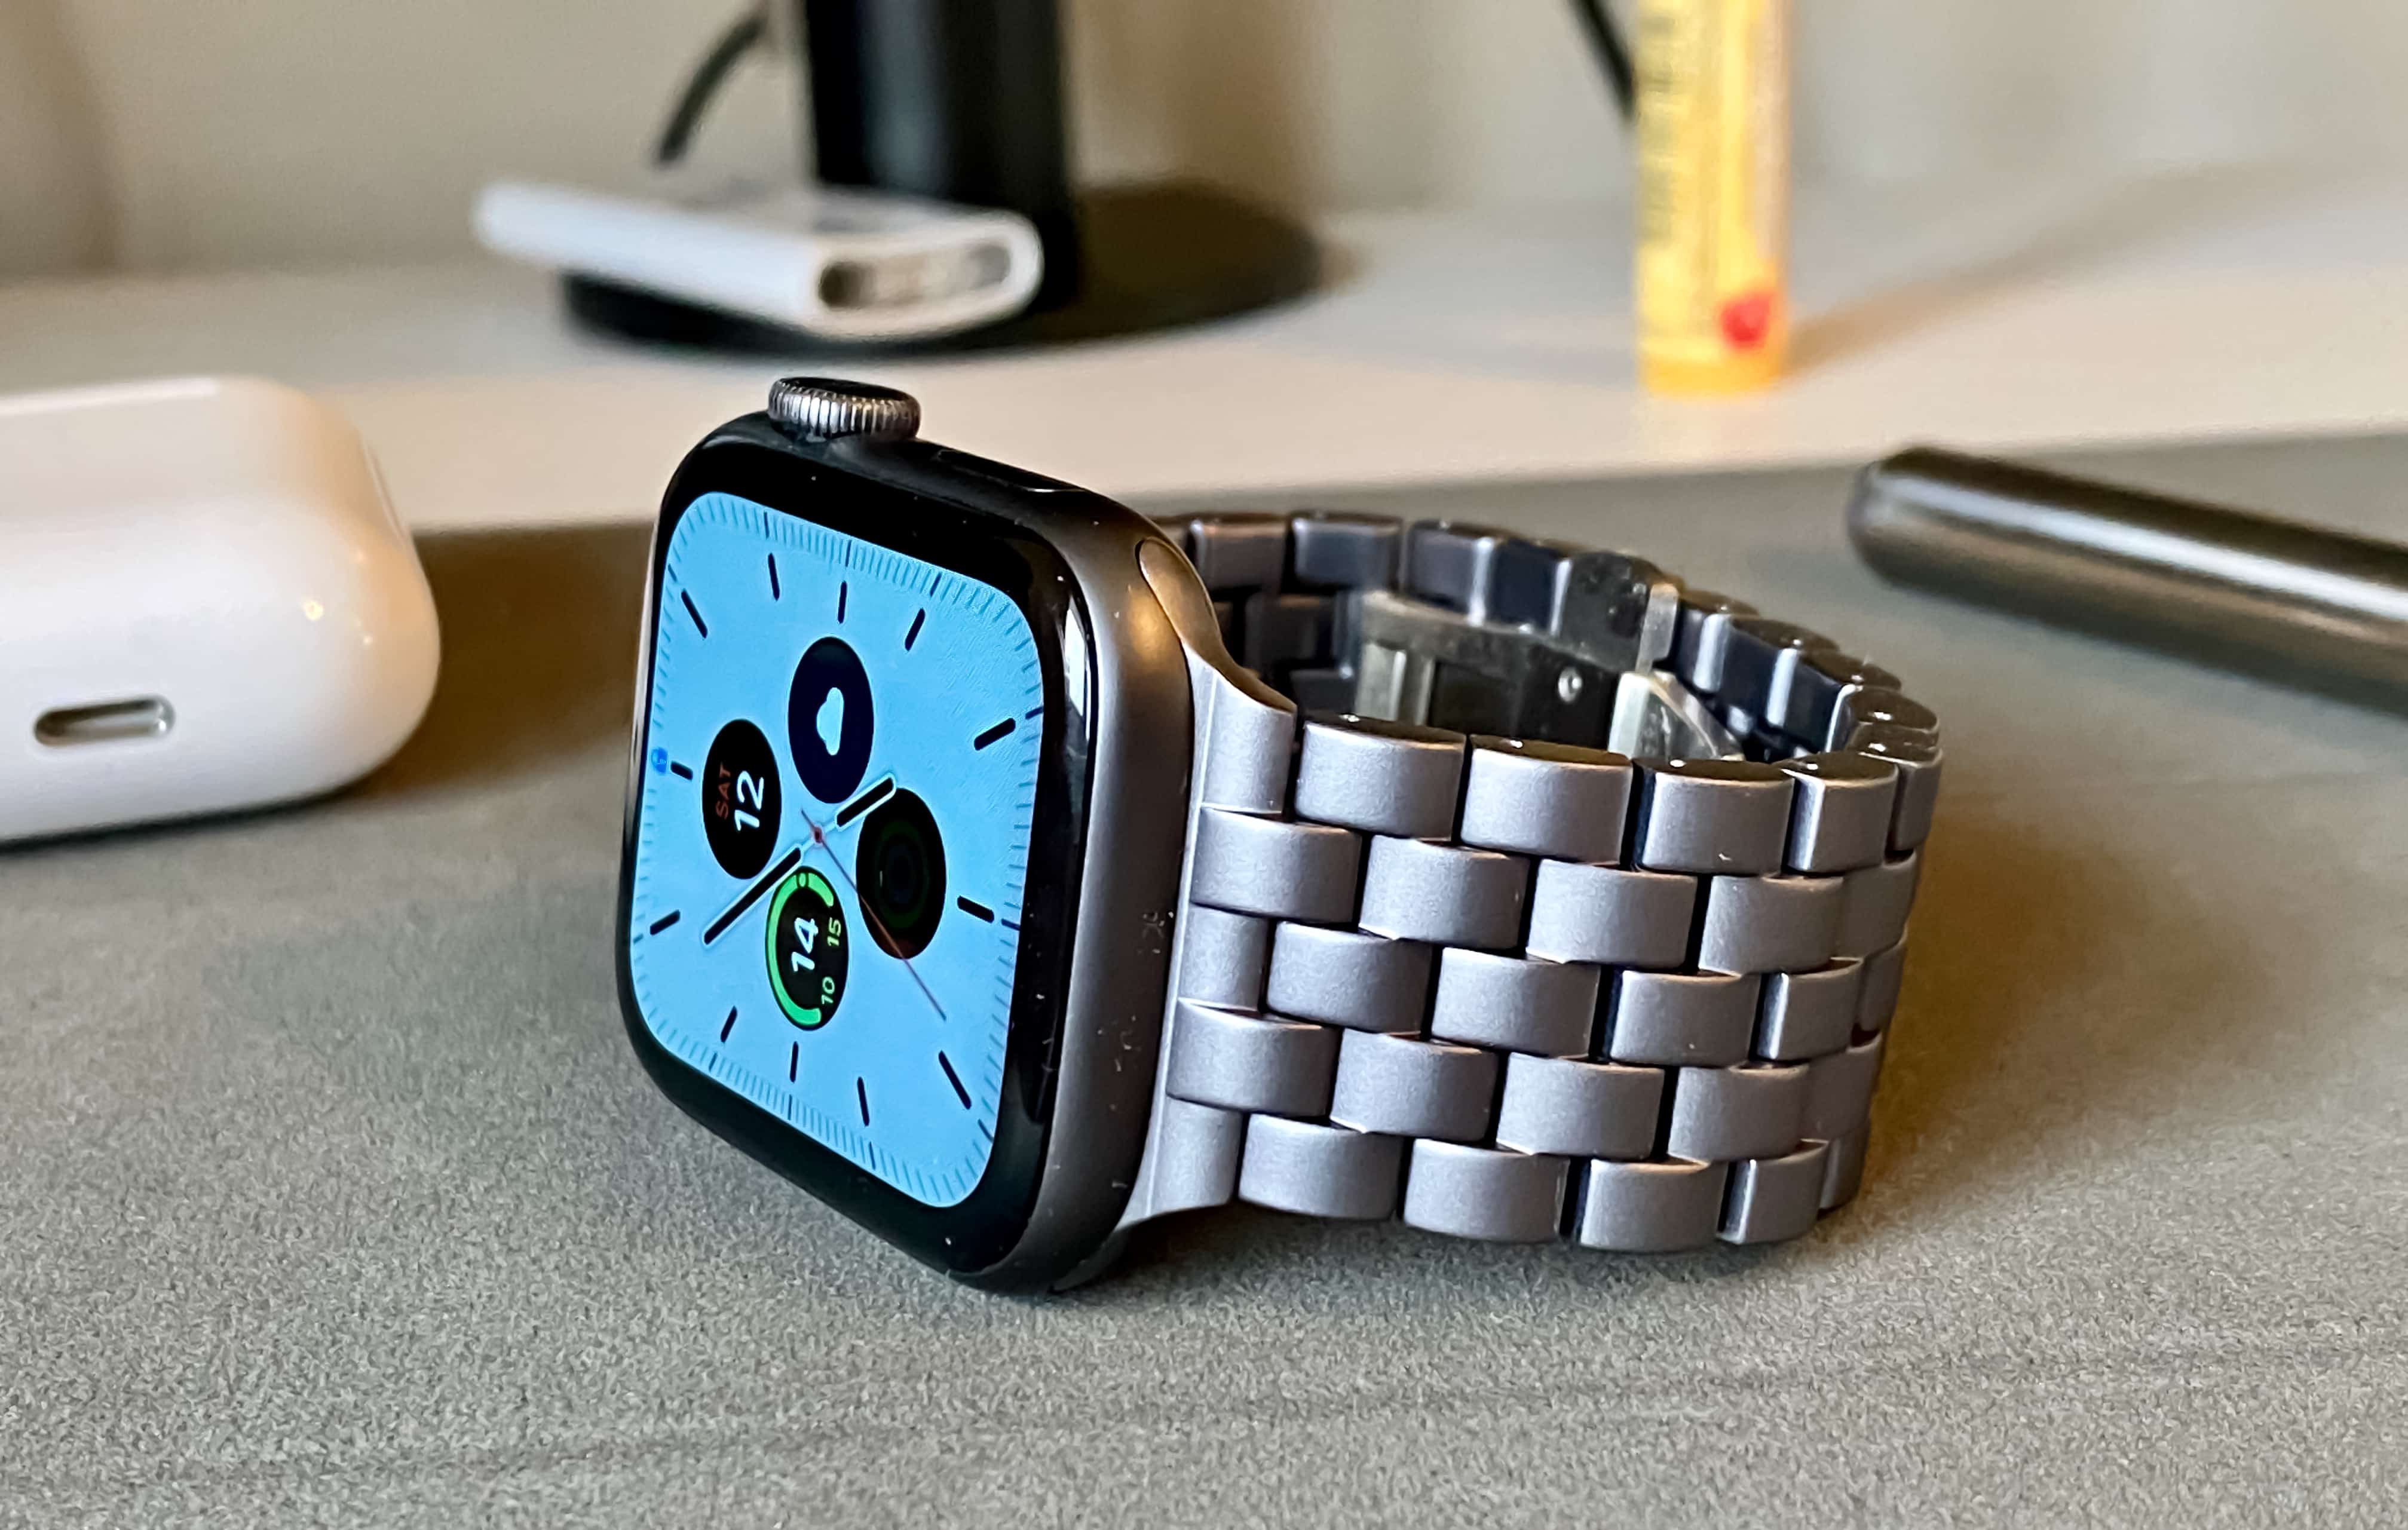 Juuk Qrono giveaway: This lightweight aluminum Apple Watch band is machined to perfection.